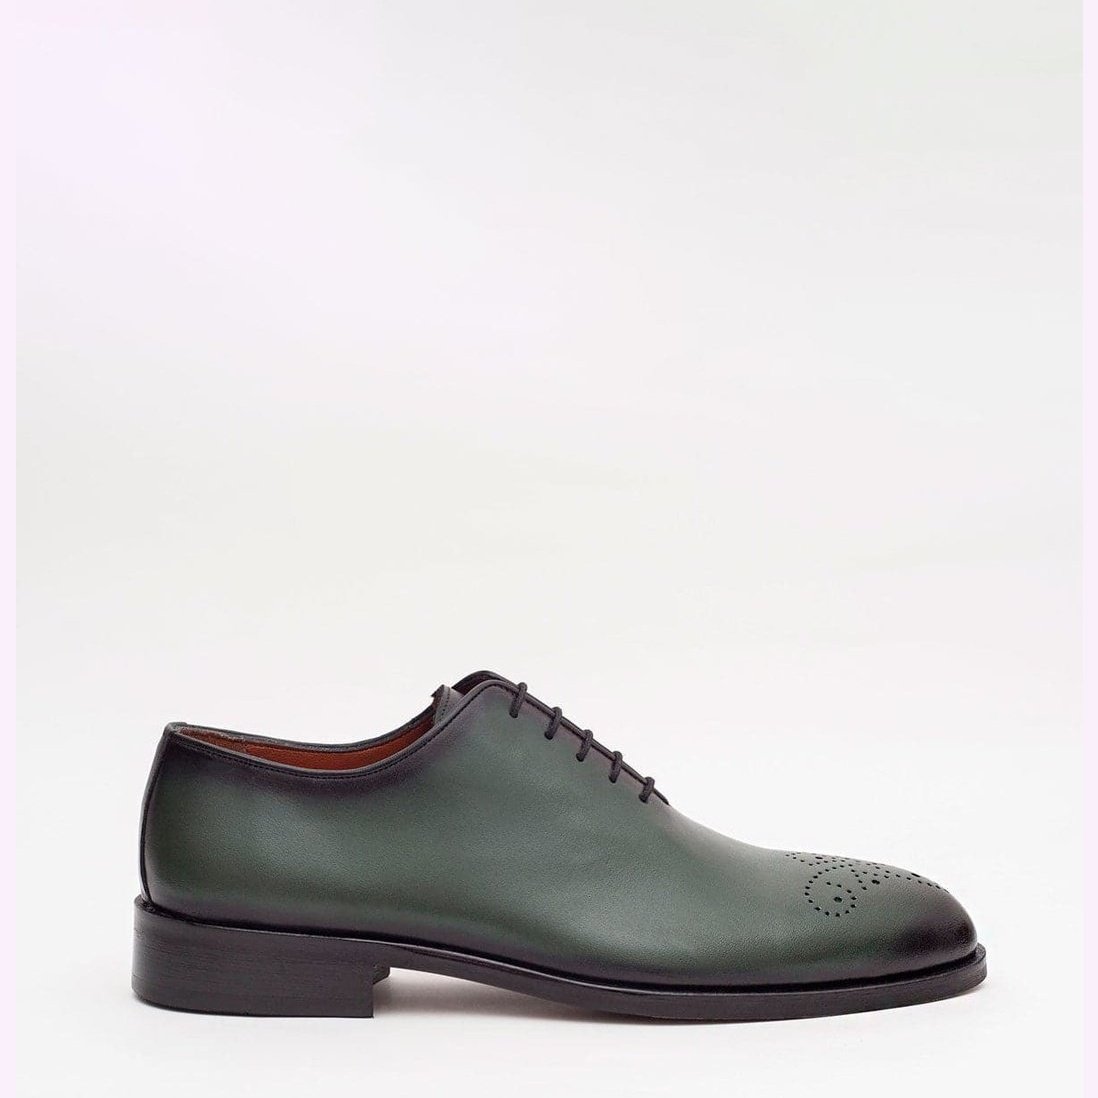 Ariston SHOES Ariston Mens Solid Green Whole Cut Oxford Leather Dress Shoes